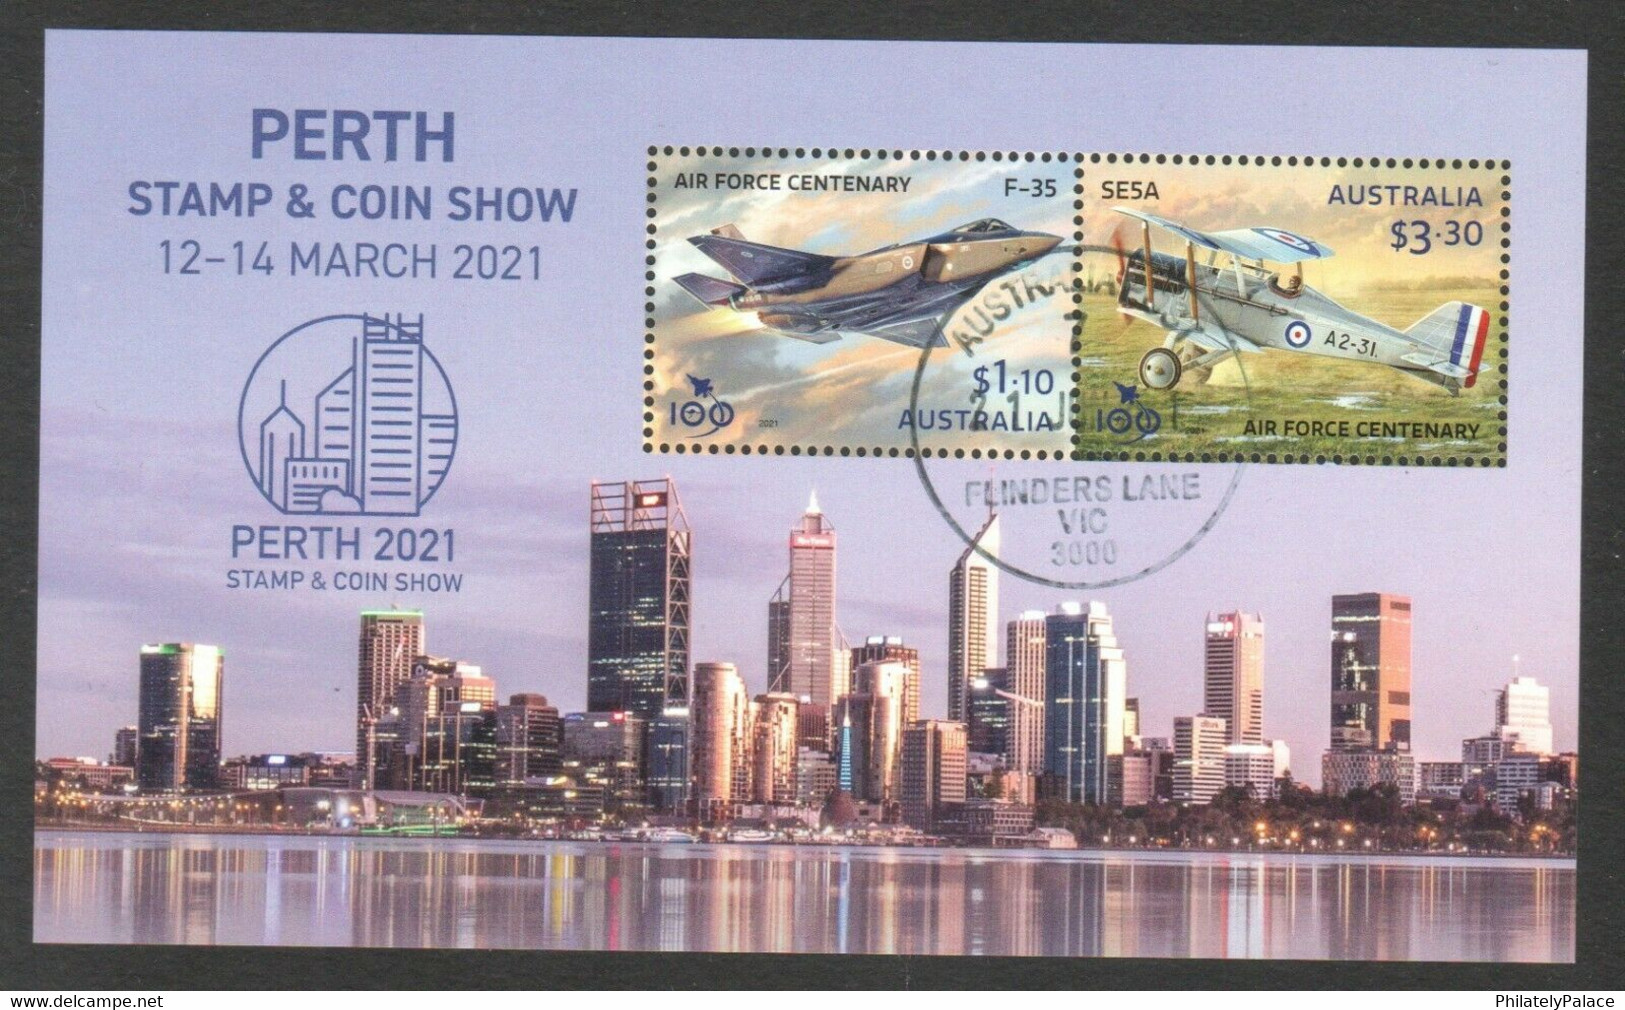 AUSTRALIA 2021 PERTH STAMP SHOW (RAAF CENTENARY) SOUVENIR SHEET OF 2 STAMPS USED  (**) - Used Stamps